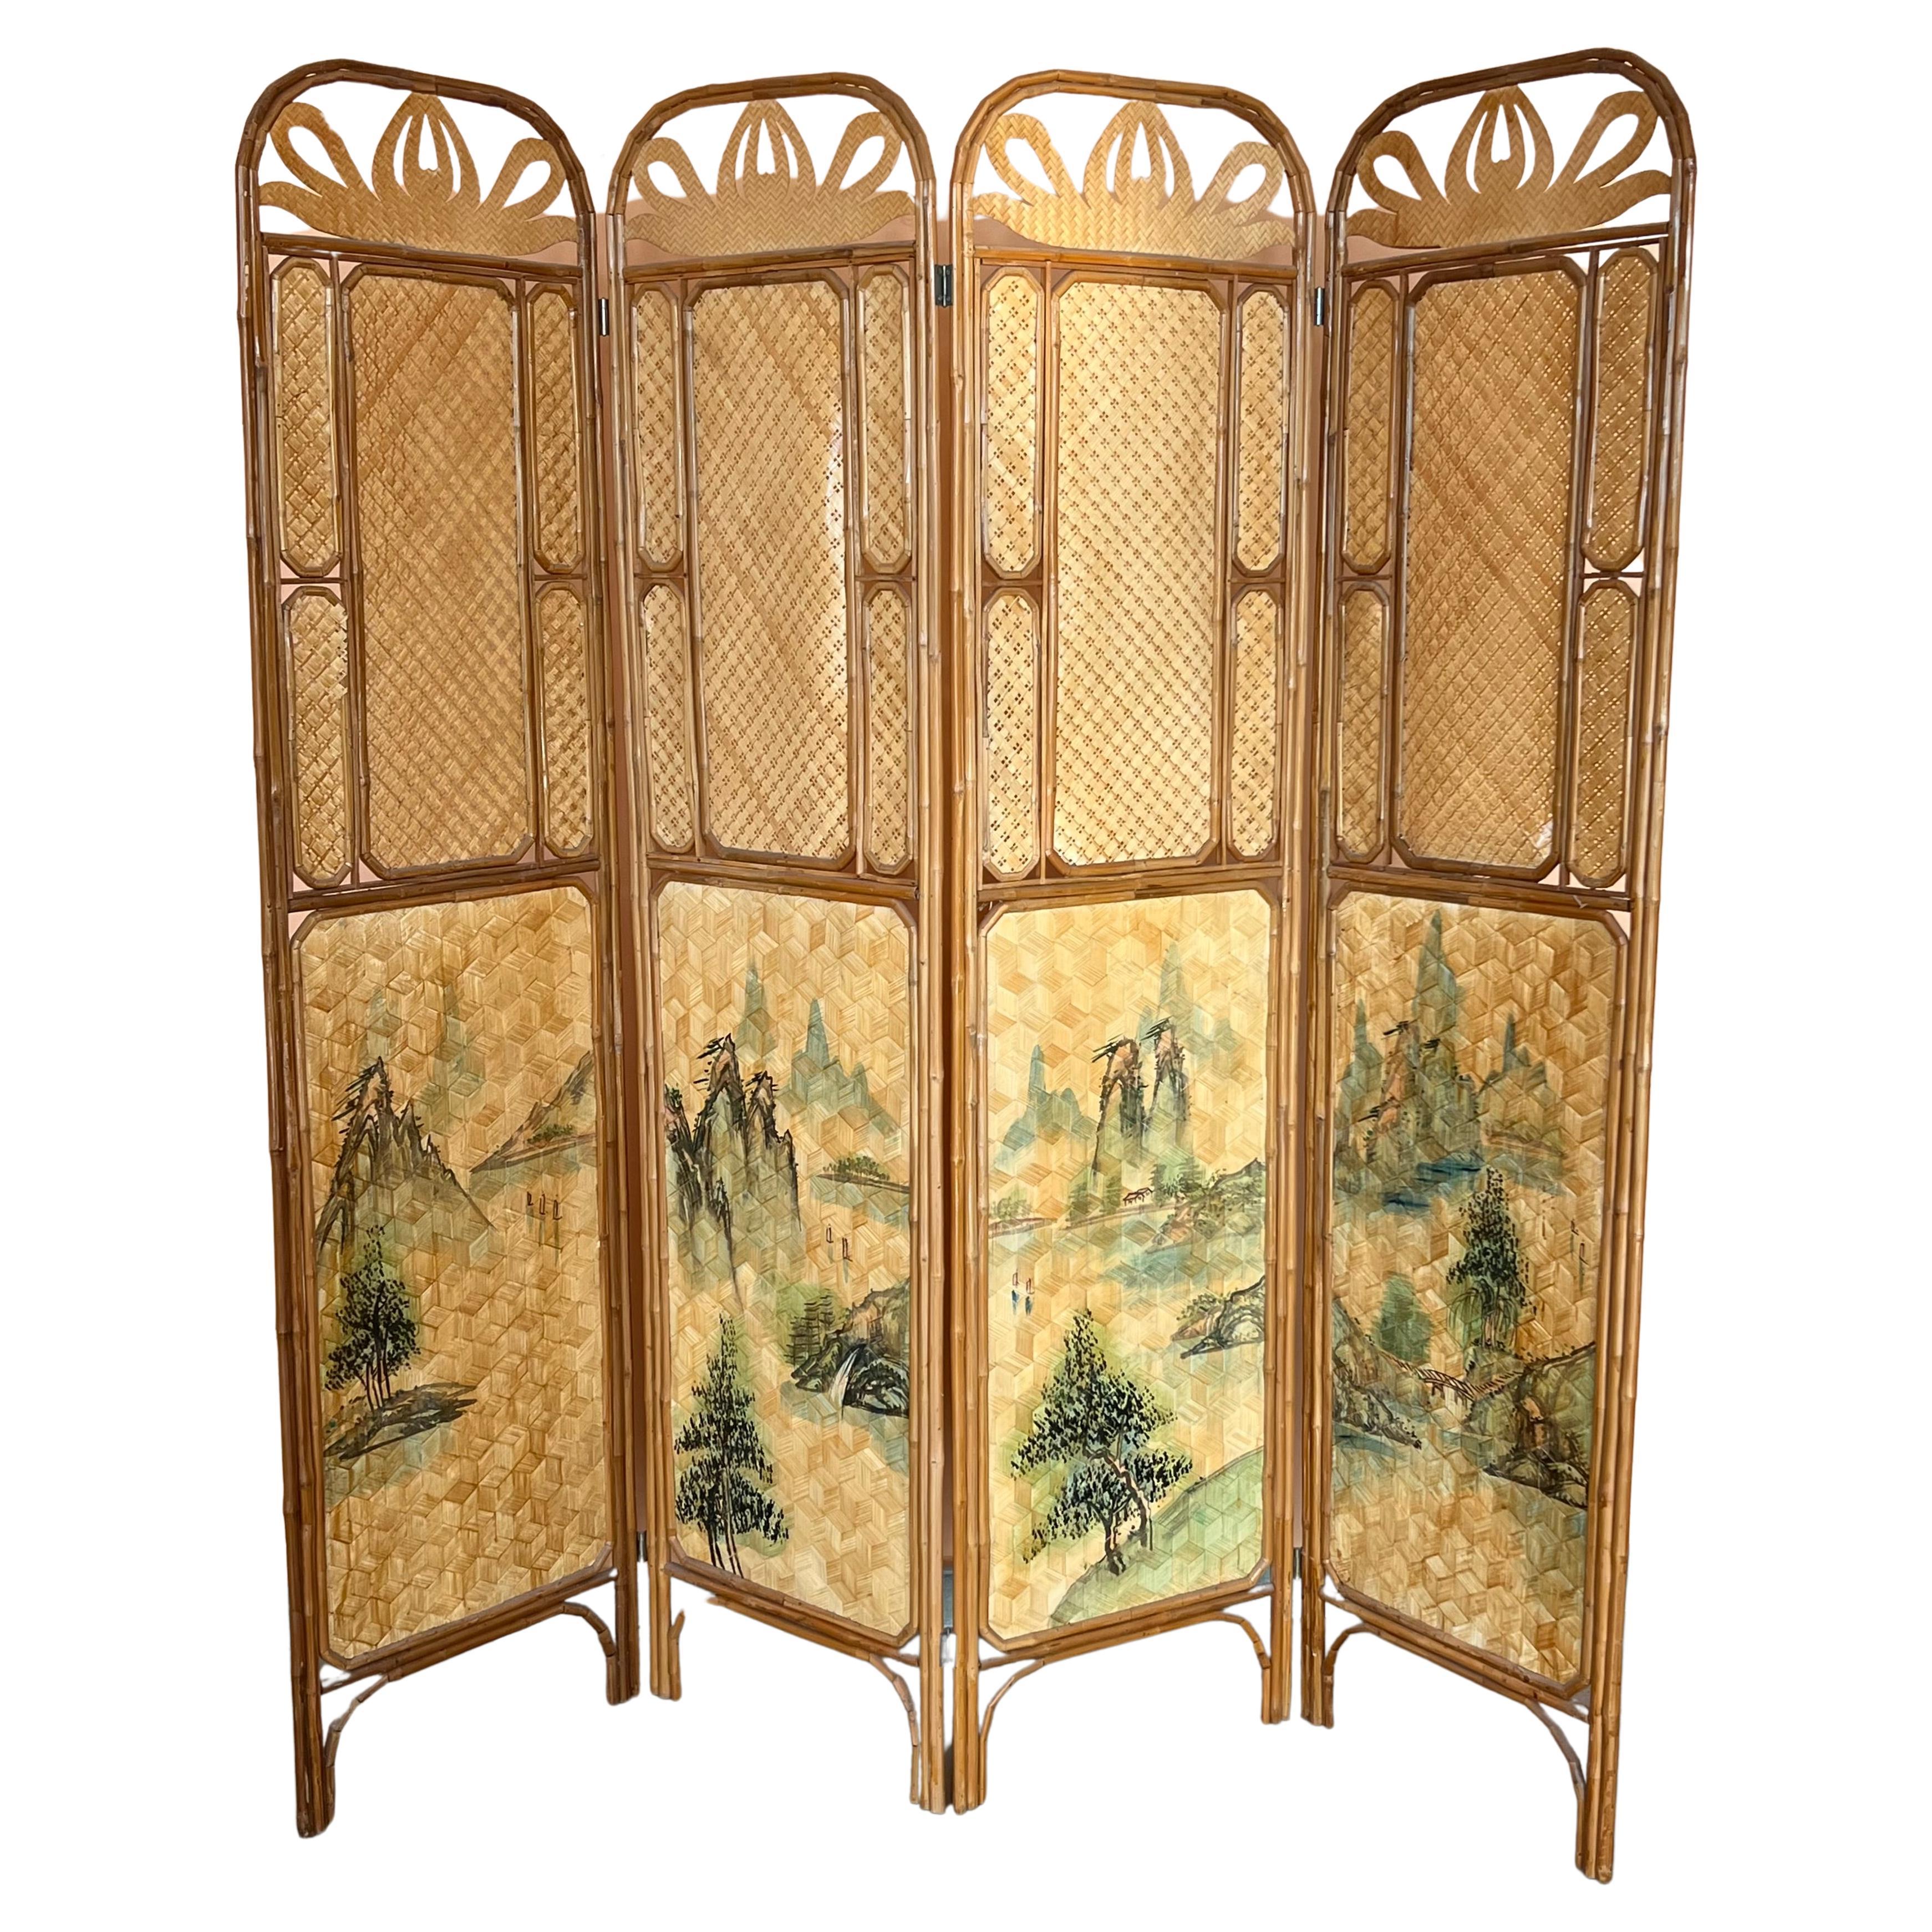 Sculptural Three-Panel Folding Screen Room Divider in Rattan and Wicker, 1960s For Sale